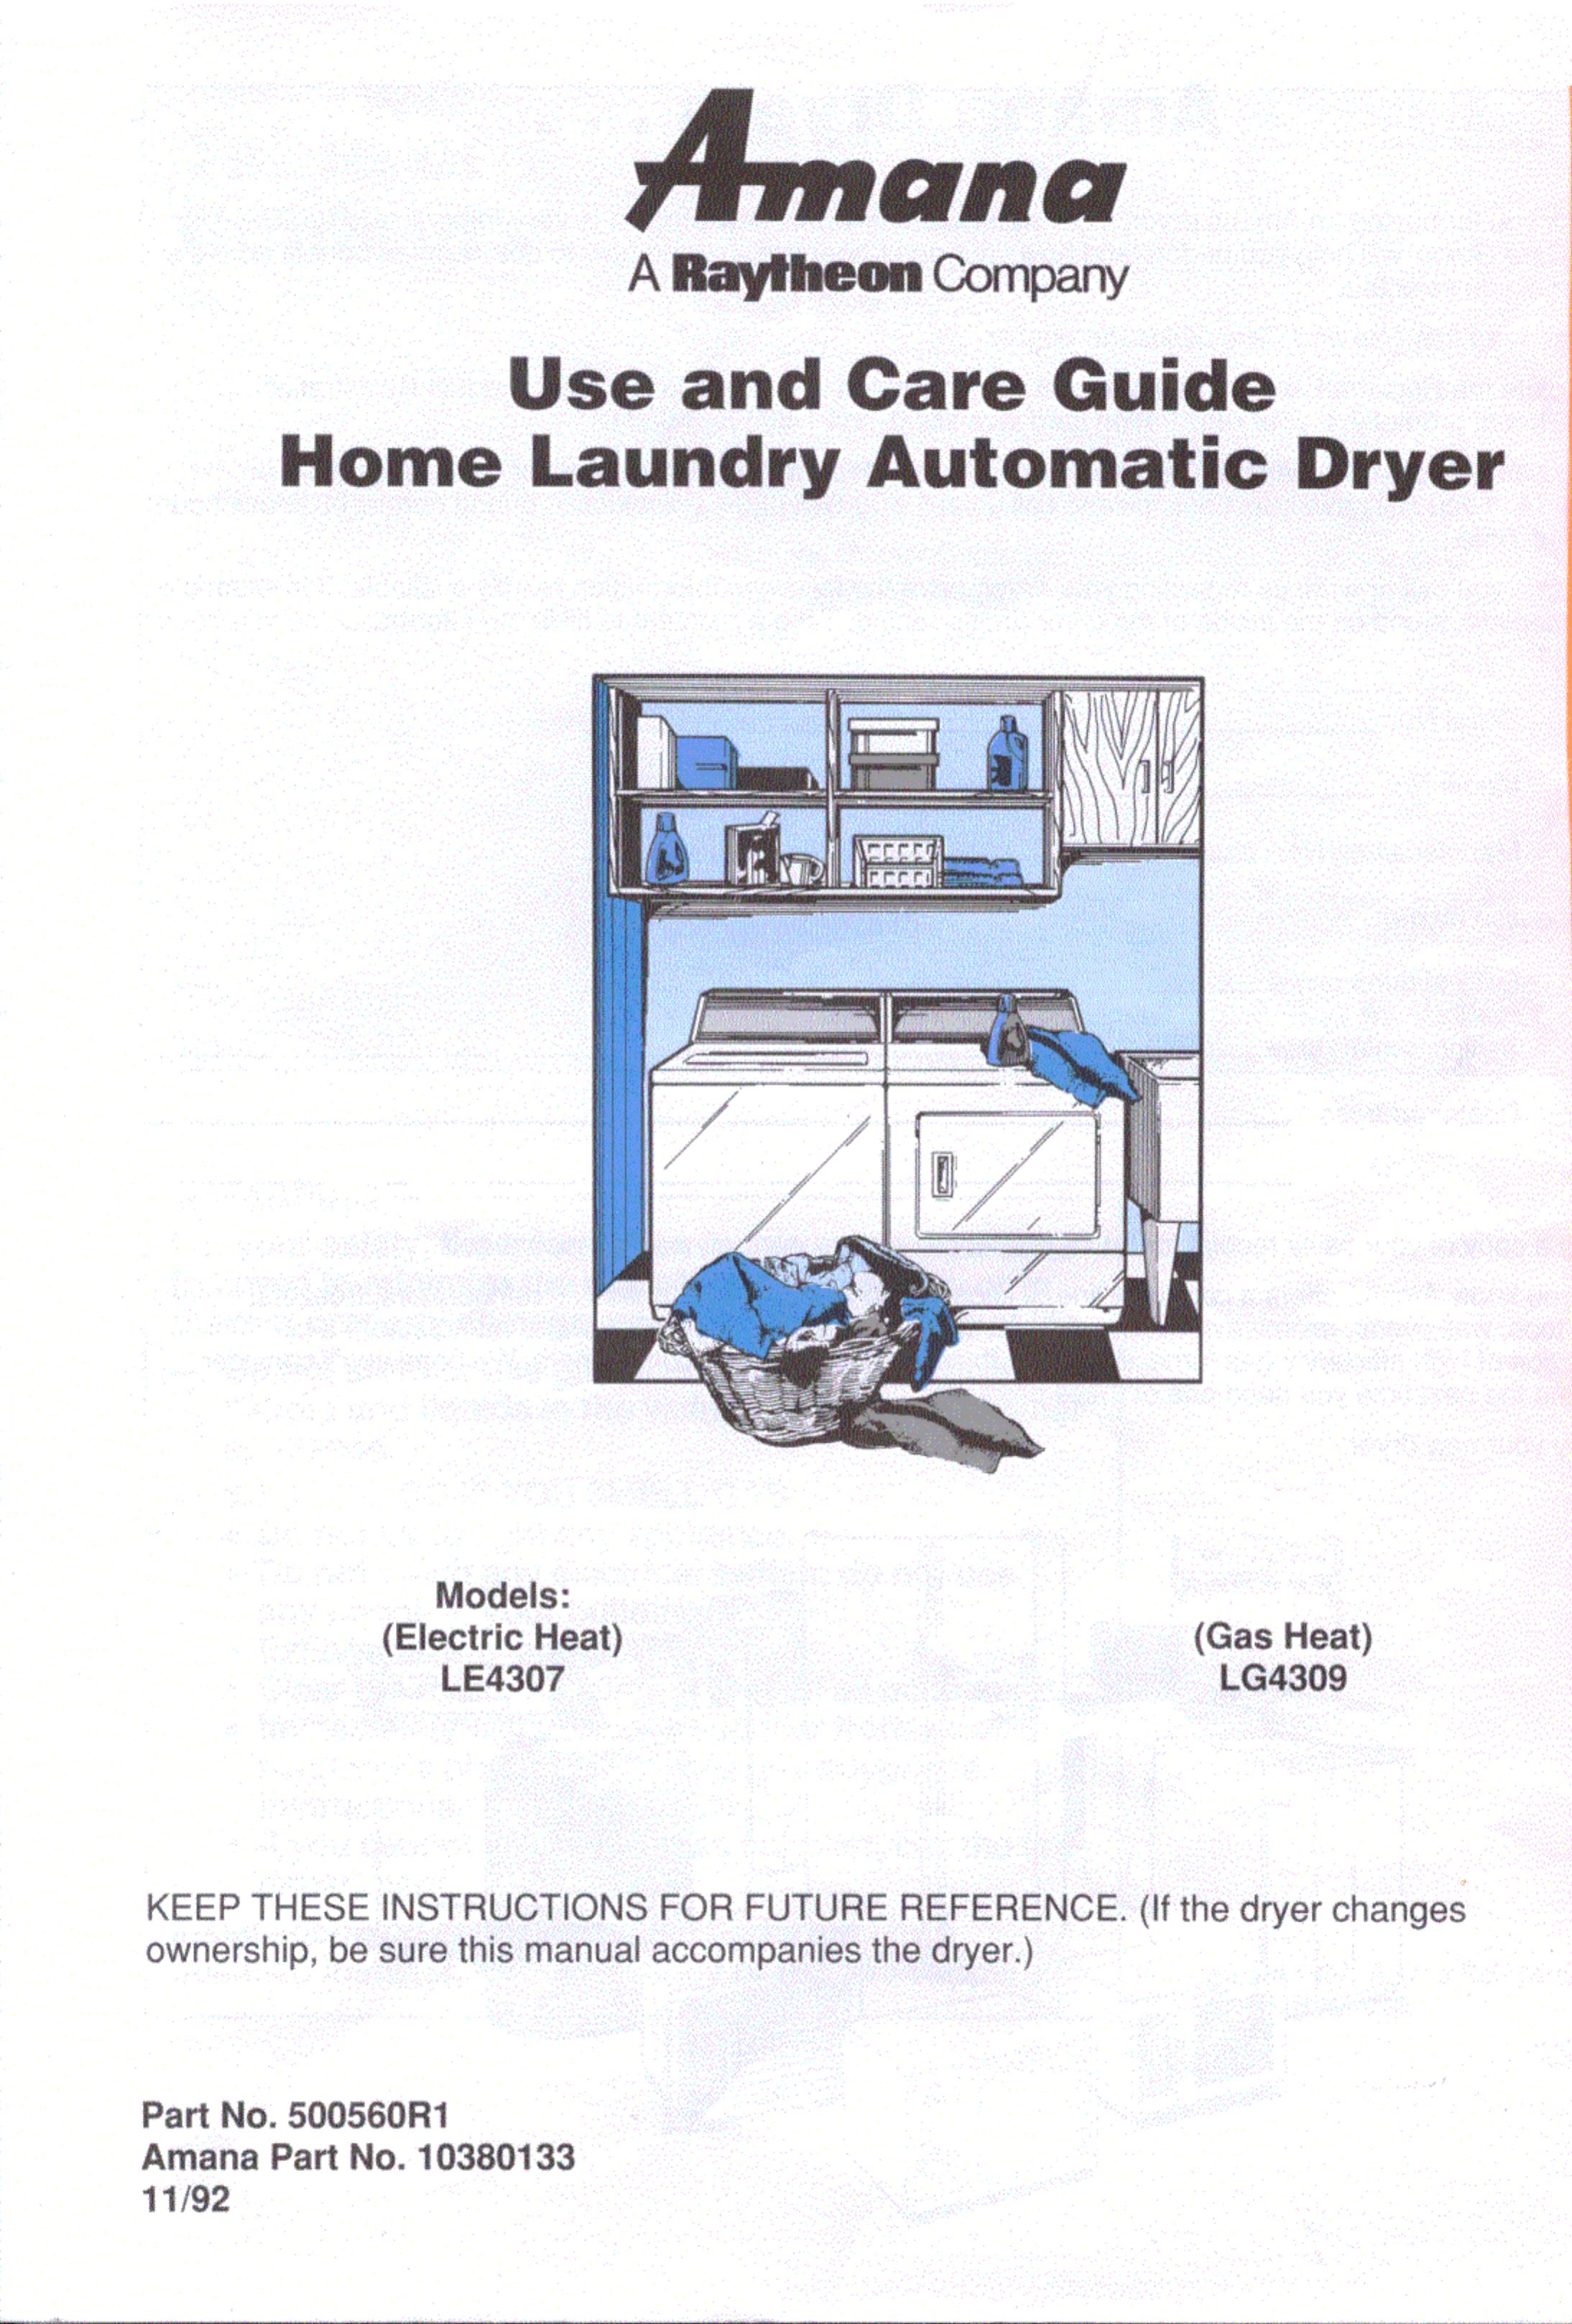 Amana LG4309 Washer/Dryer User Manual (Page 1)